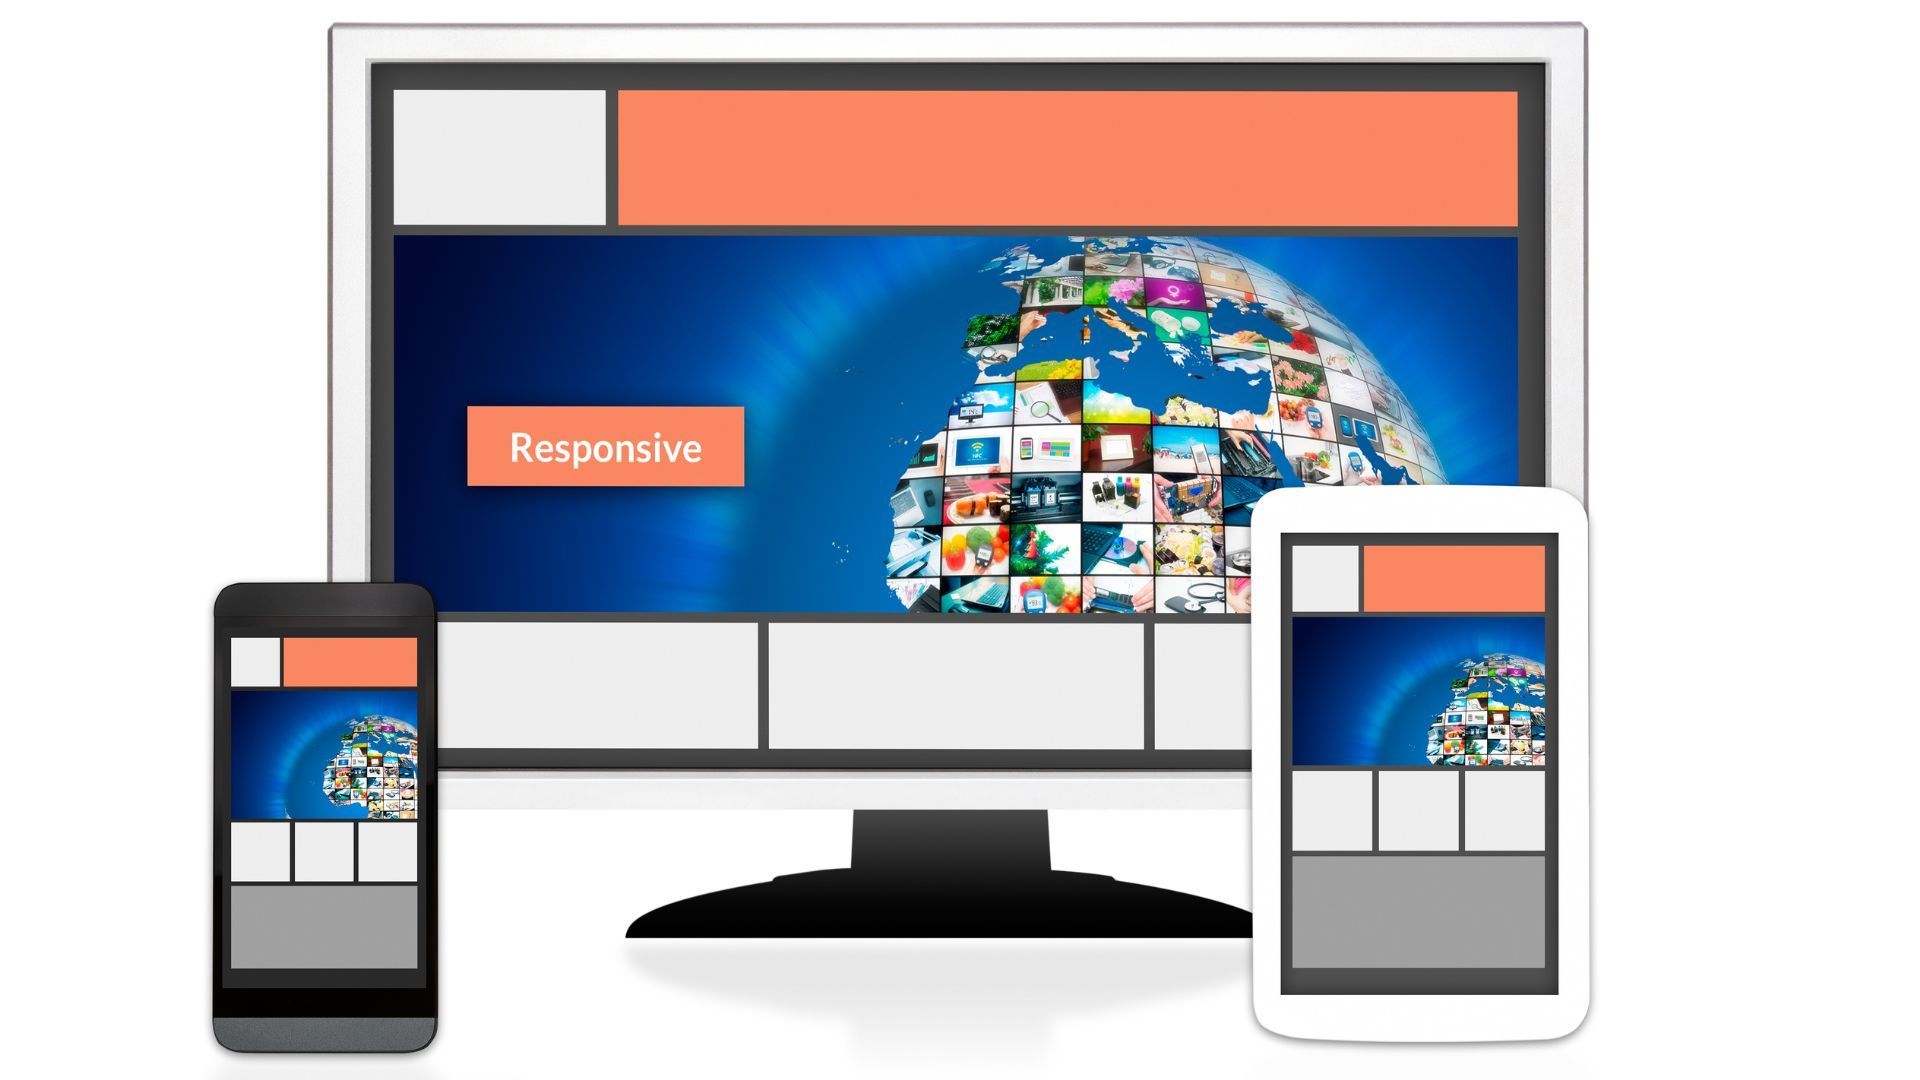 Graphic representation of responsive web design across different devices, including a desktop monitor, a tablet, and a smartphone, all showcasing a cohesive website layout that adapts to various screen sizes. The displayed content features a globe composed of various images, symbolizing the worldwide connectivity of the web, and a label prominently stating 'Responsive.' This illustrates a web designer's skill in creating versatile, user-friendly website interfaces in Athens, Georgia, highlighting their expertise in modern web development standards.